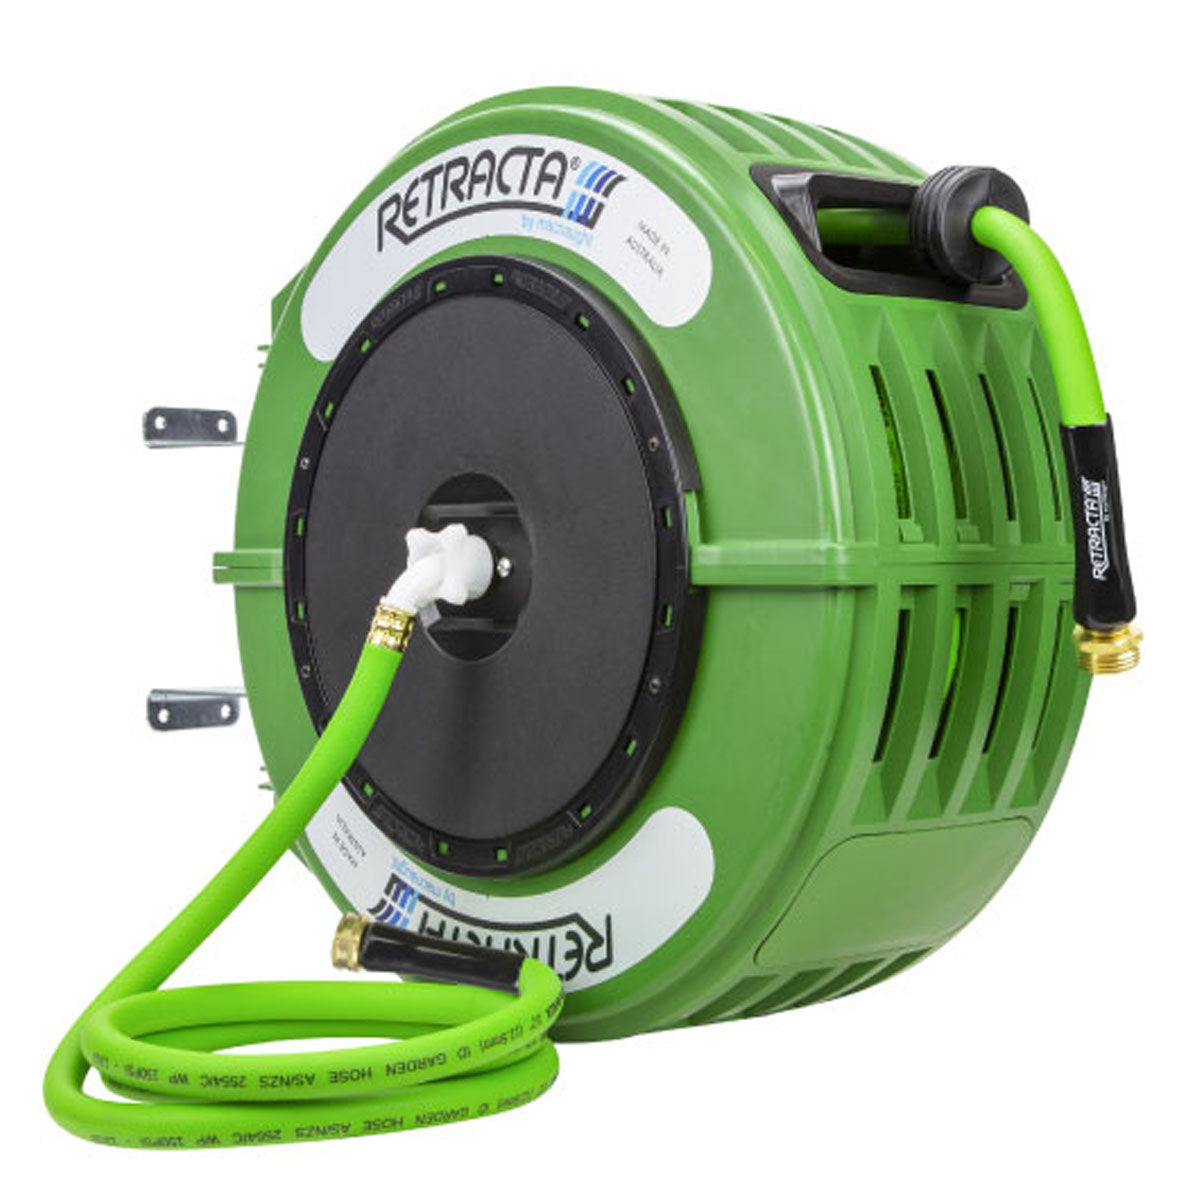 NOHA Model 5D Hose Reel Specifications